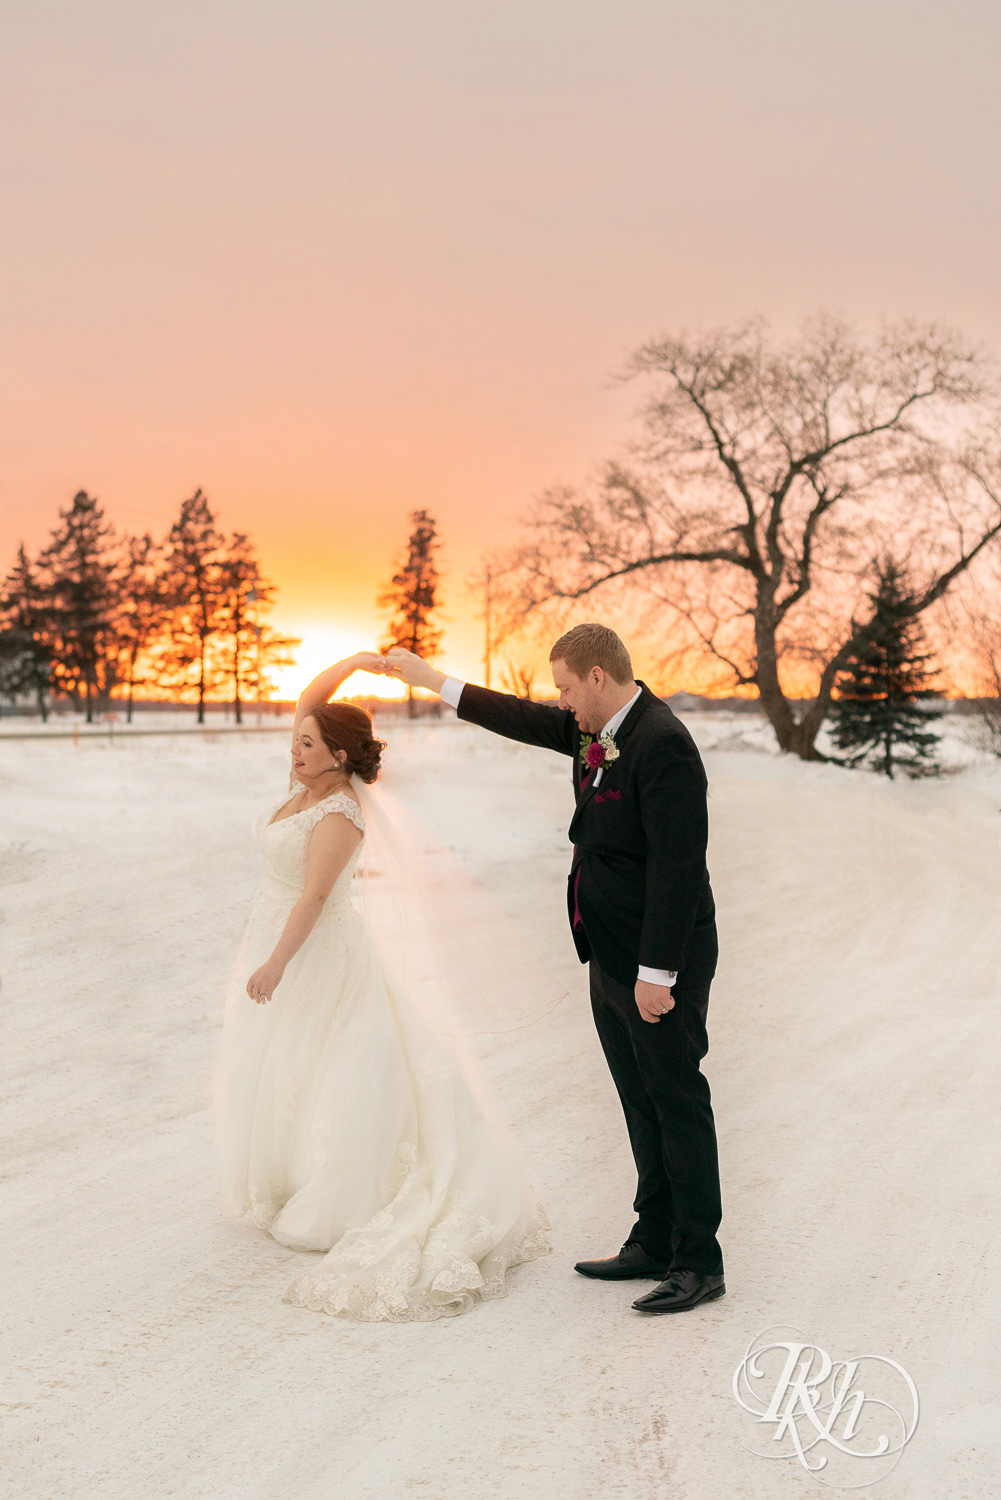 Bride and groom kissing at sunset in snow at Glenhaven Events in Farmington, Minnesota.